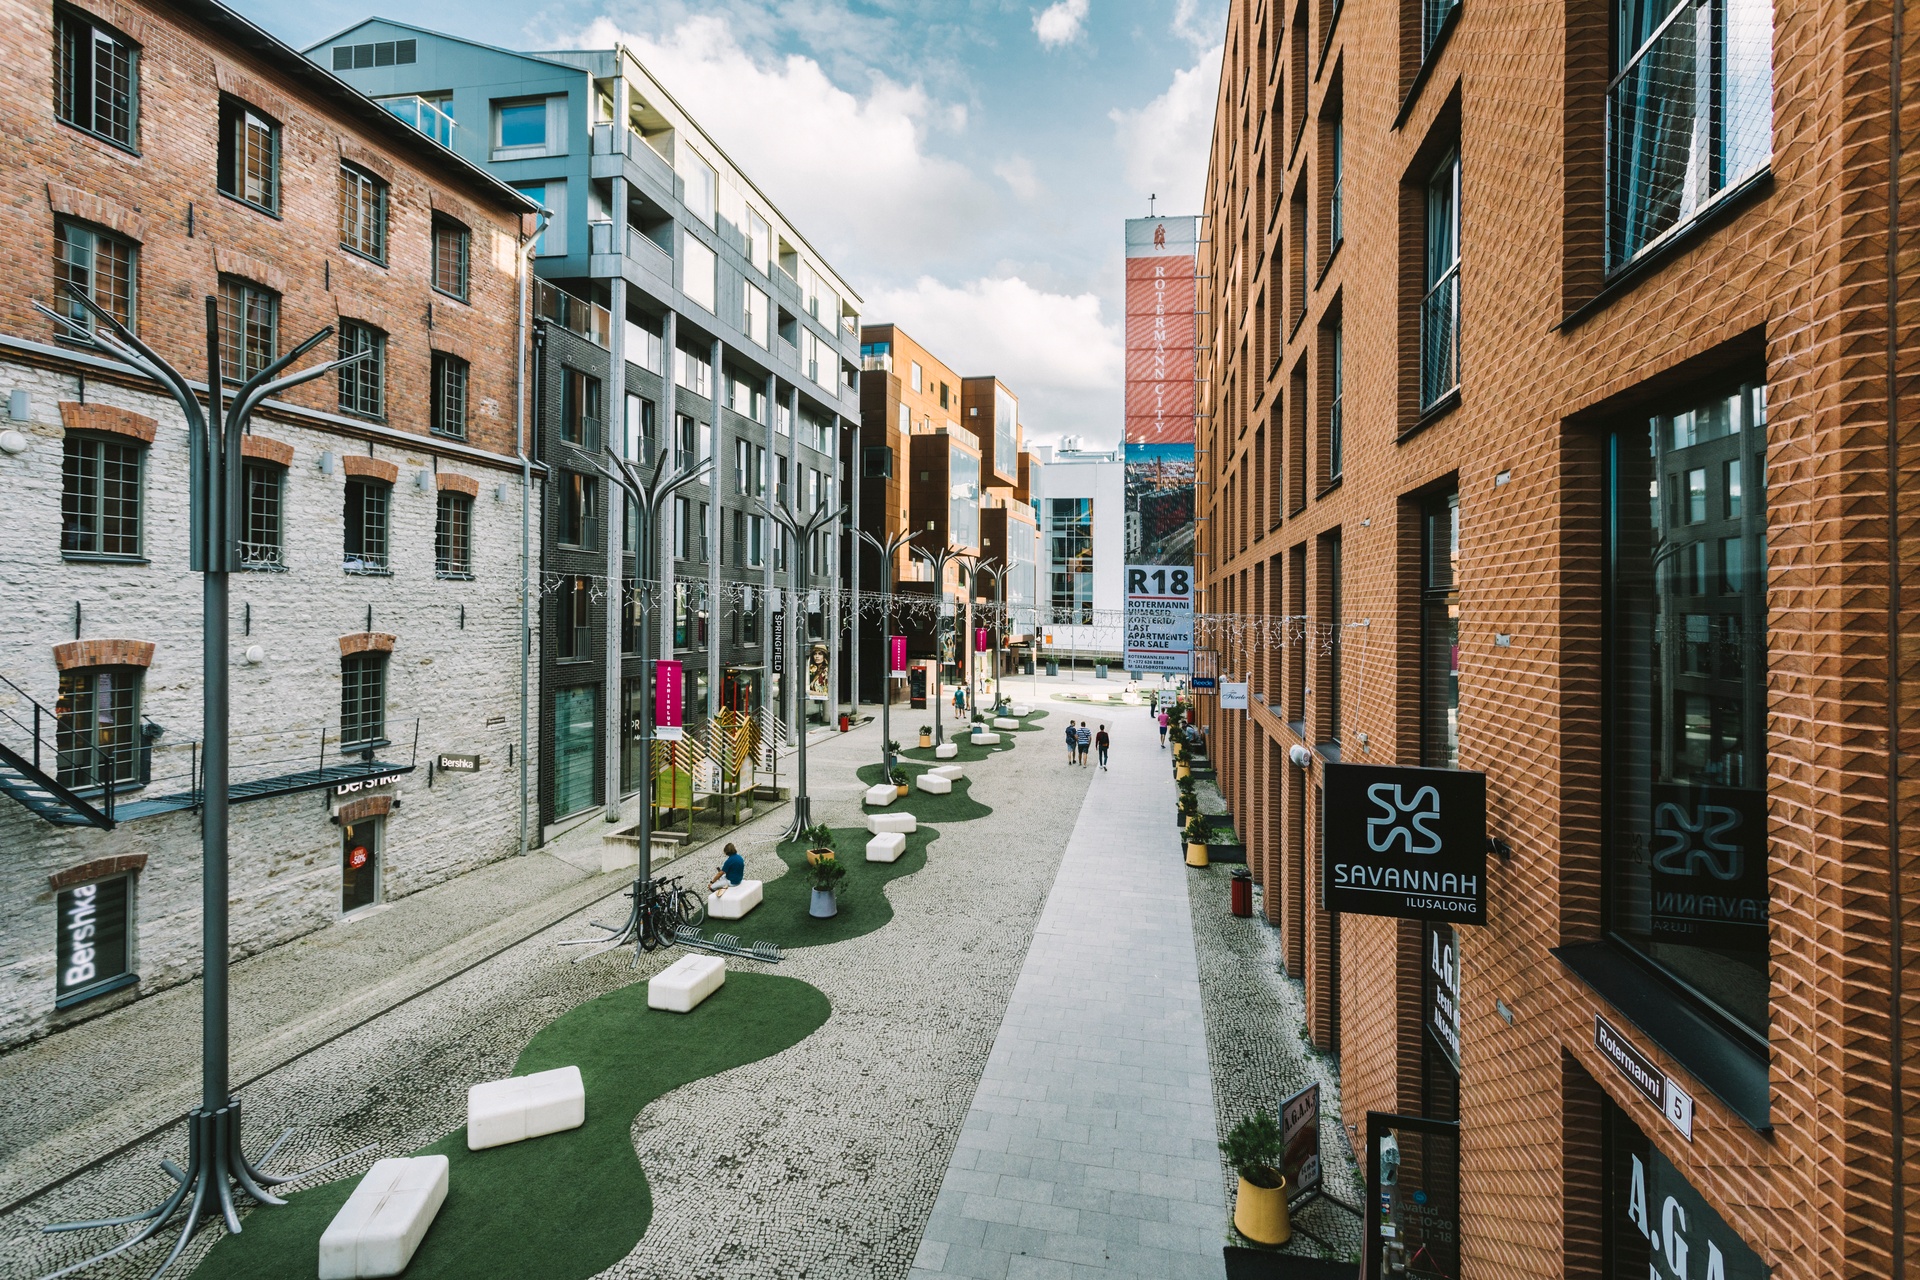 Rotermanni Quarter has a modern industrial feel